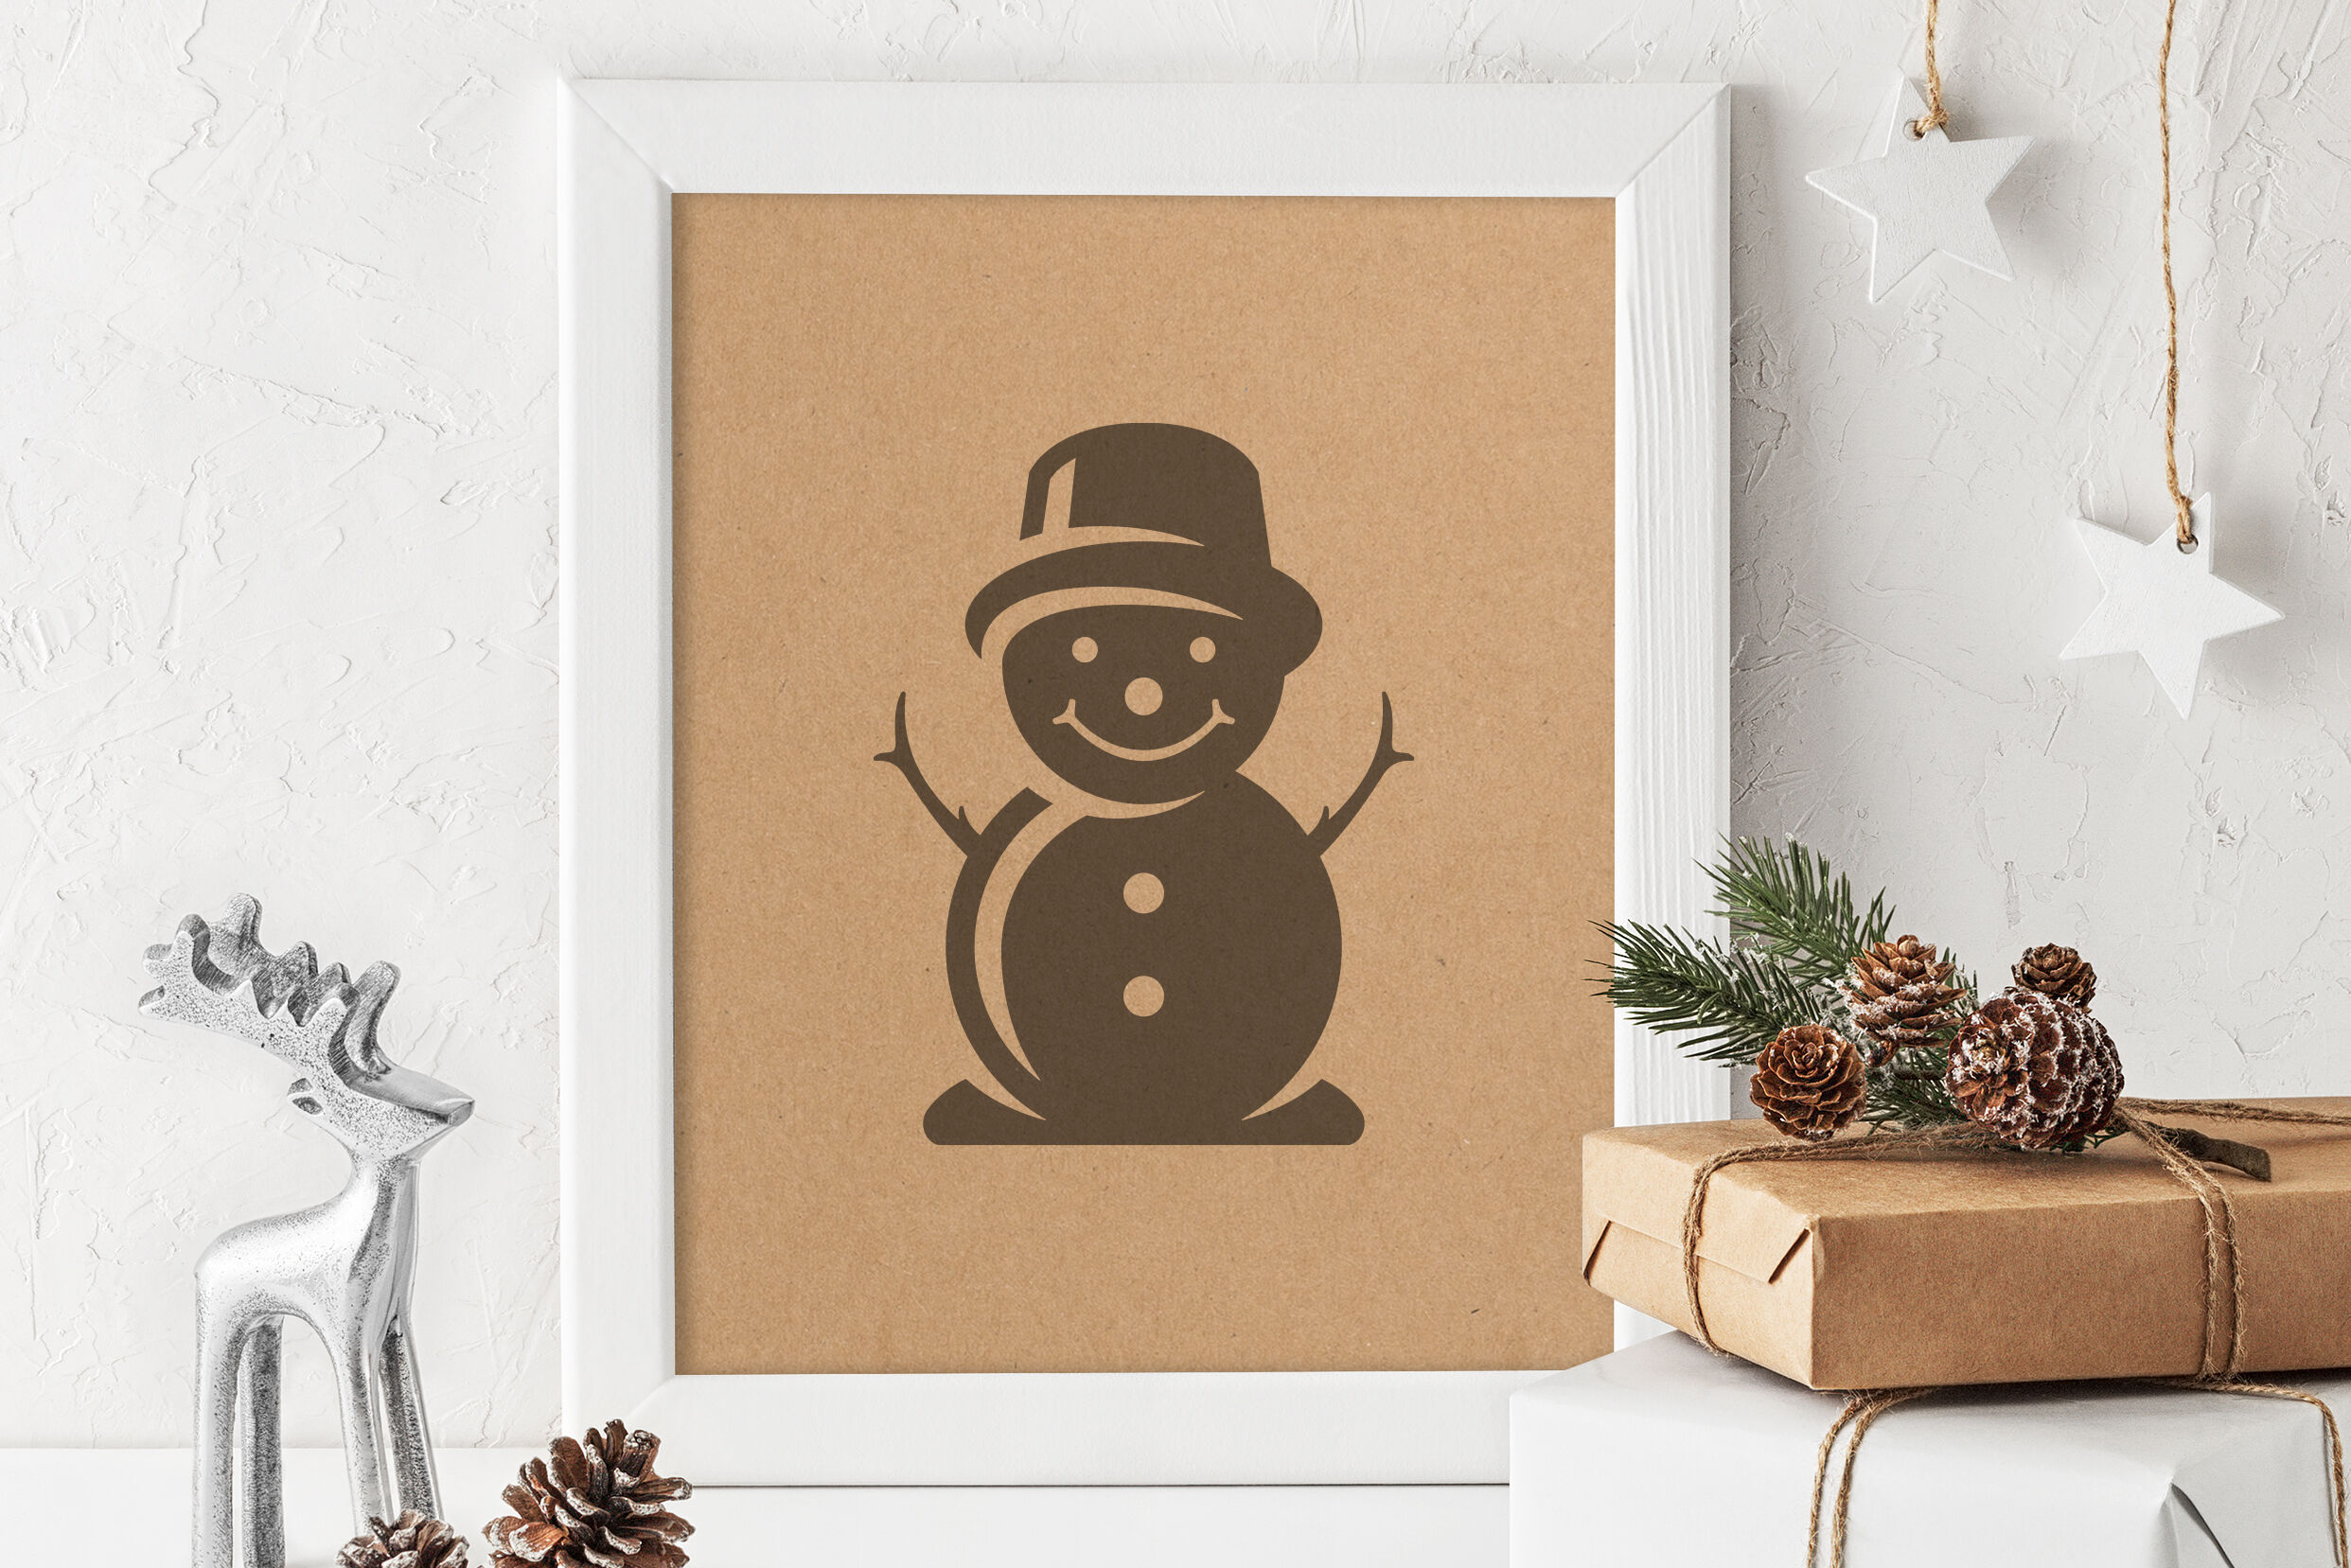 Snowman stock vector. Illustration of smile, contemporary - 6986859